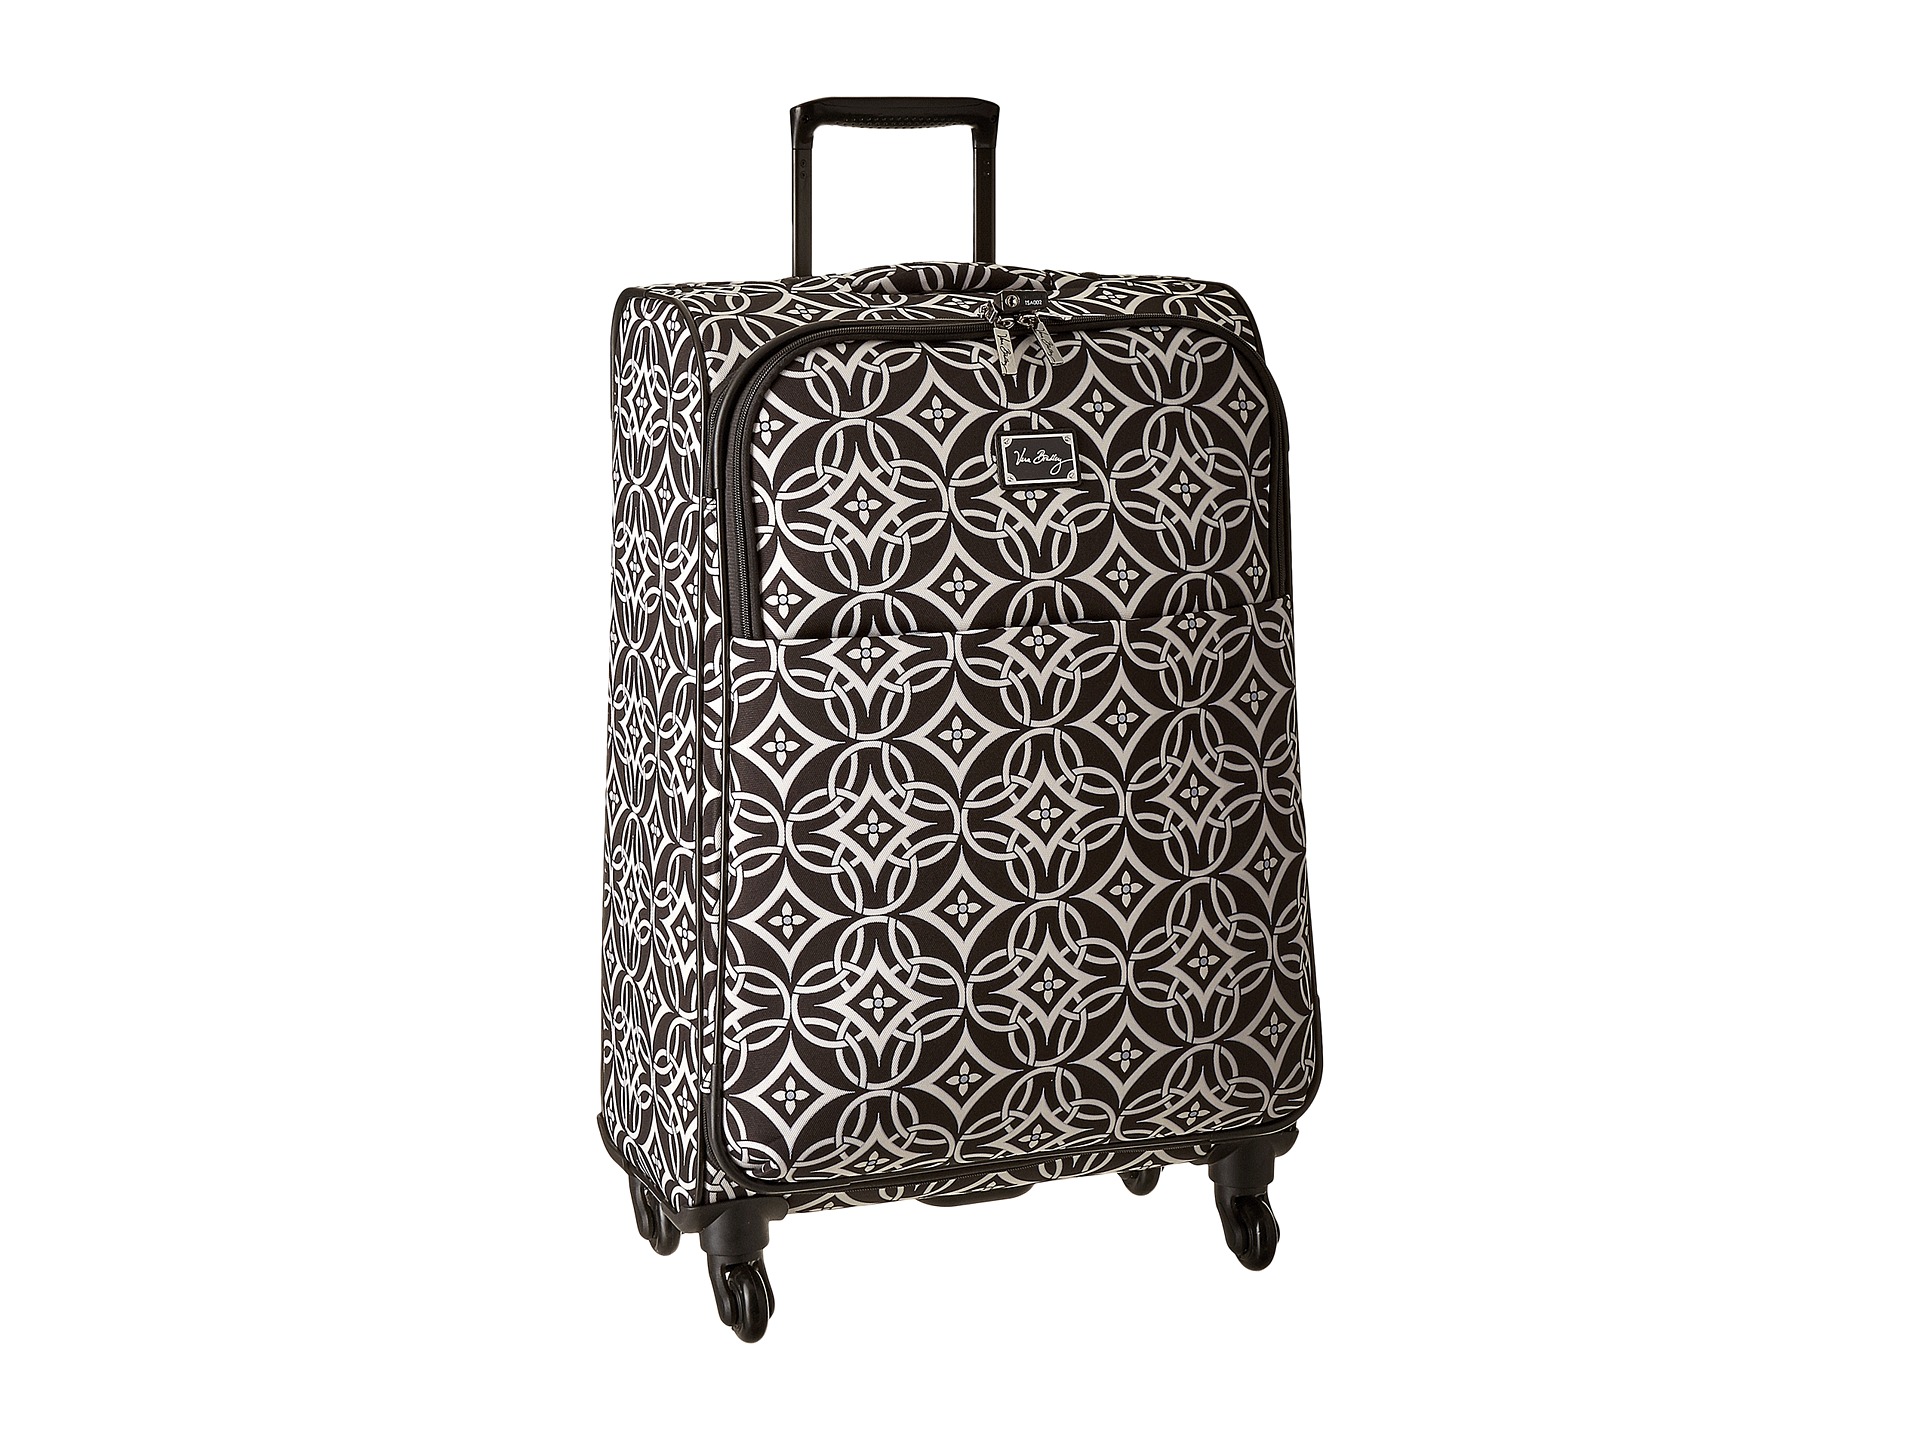 Buy carry bags online india, vera bradley luggage 27 spinner questions